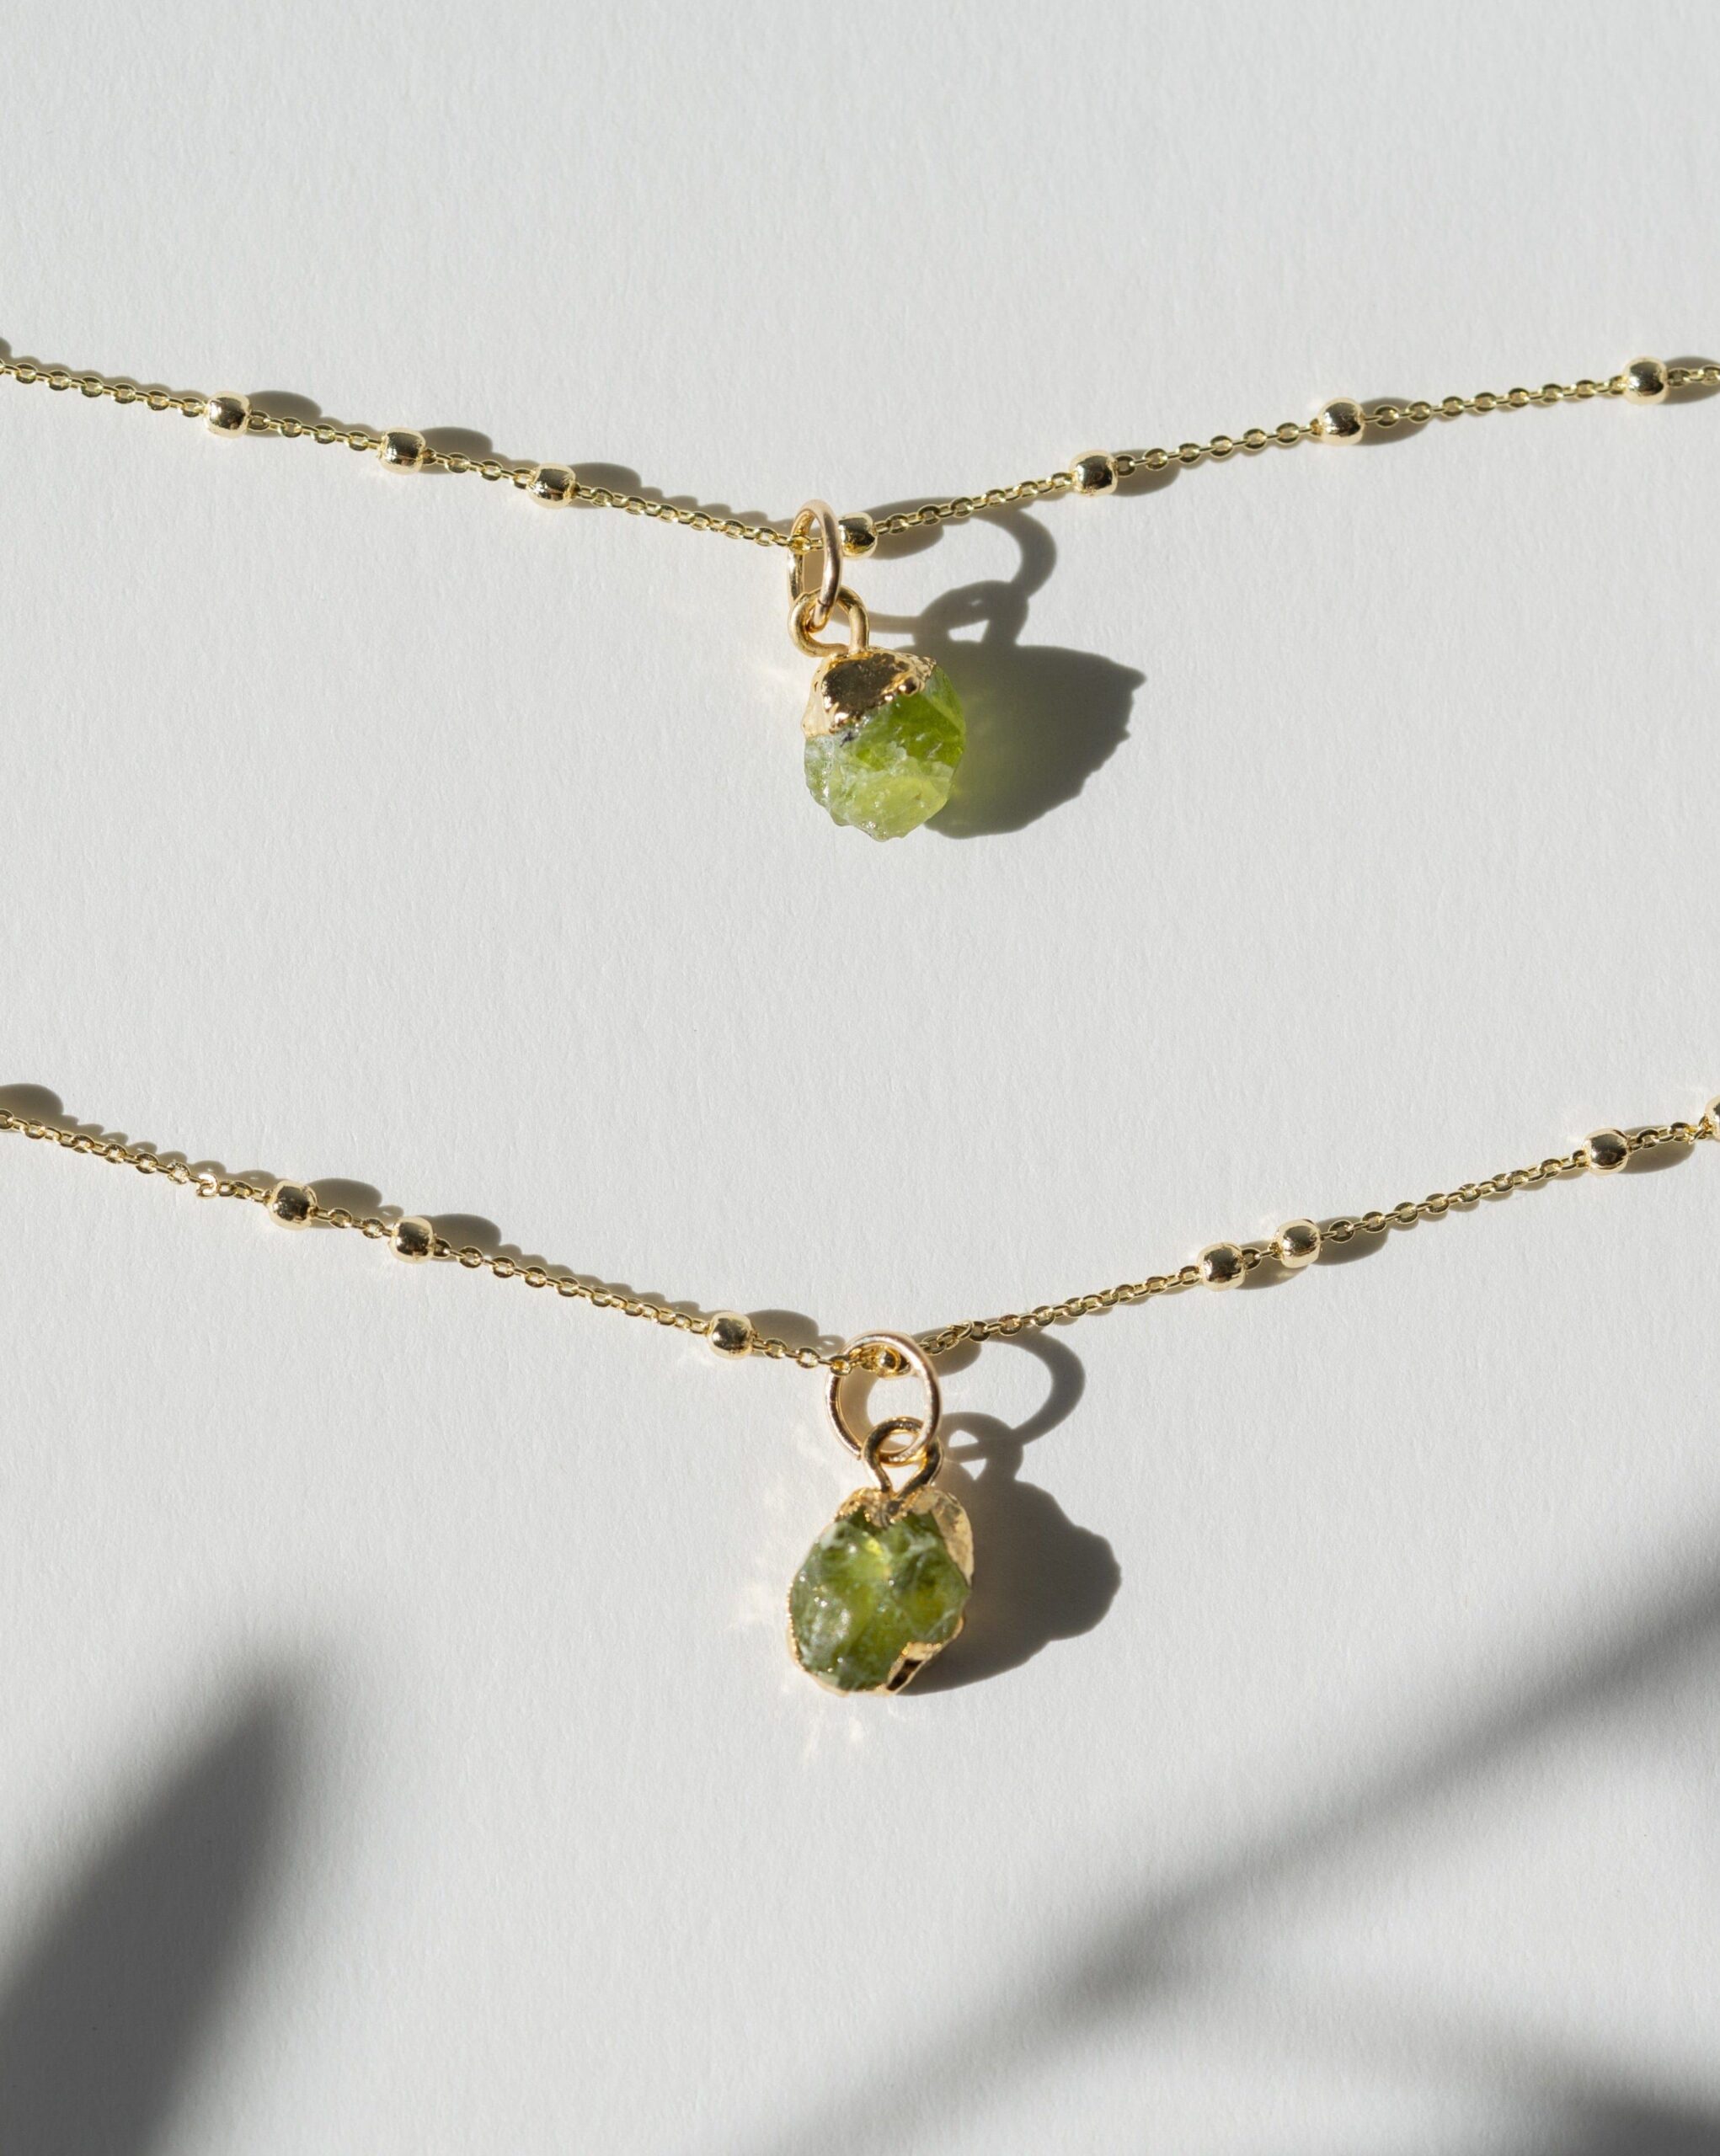 The Stunning Beauty of Peridot Necklaces:
A Must-Have Addition to Your Jewelry Collection